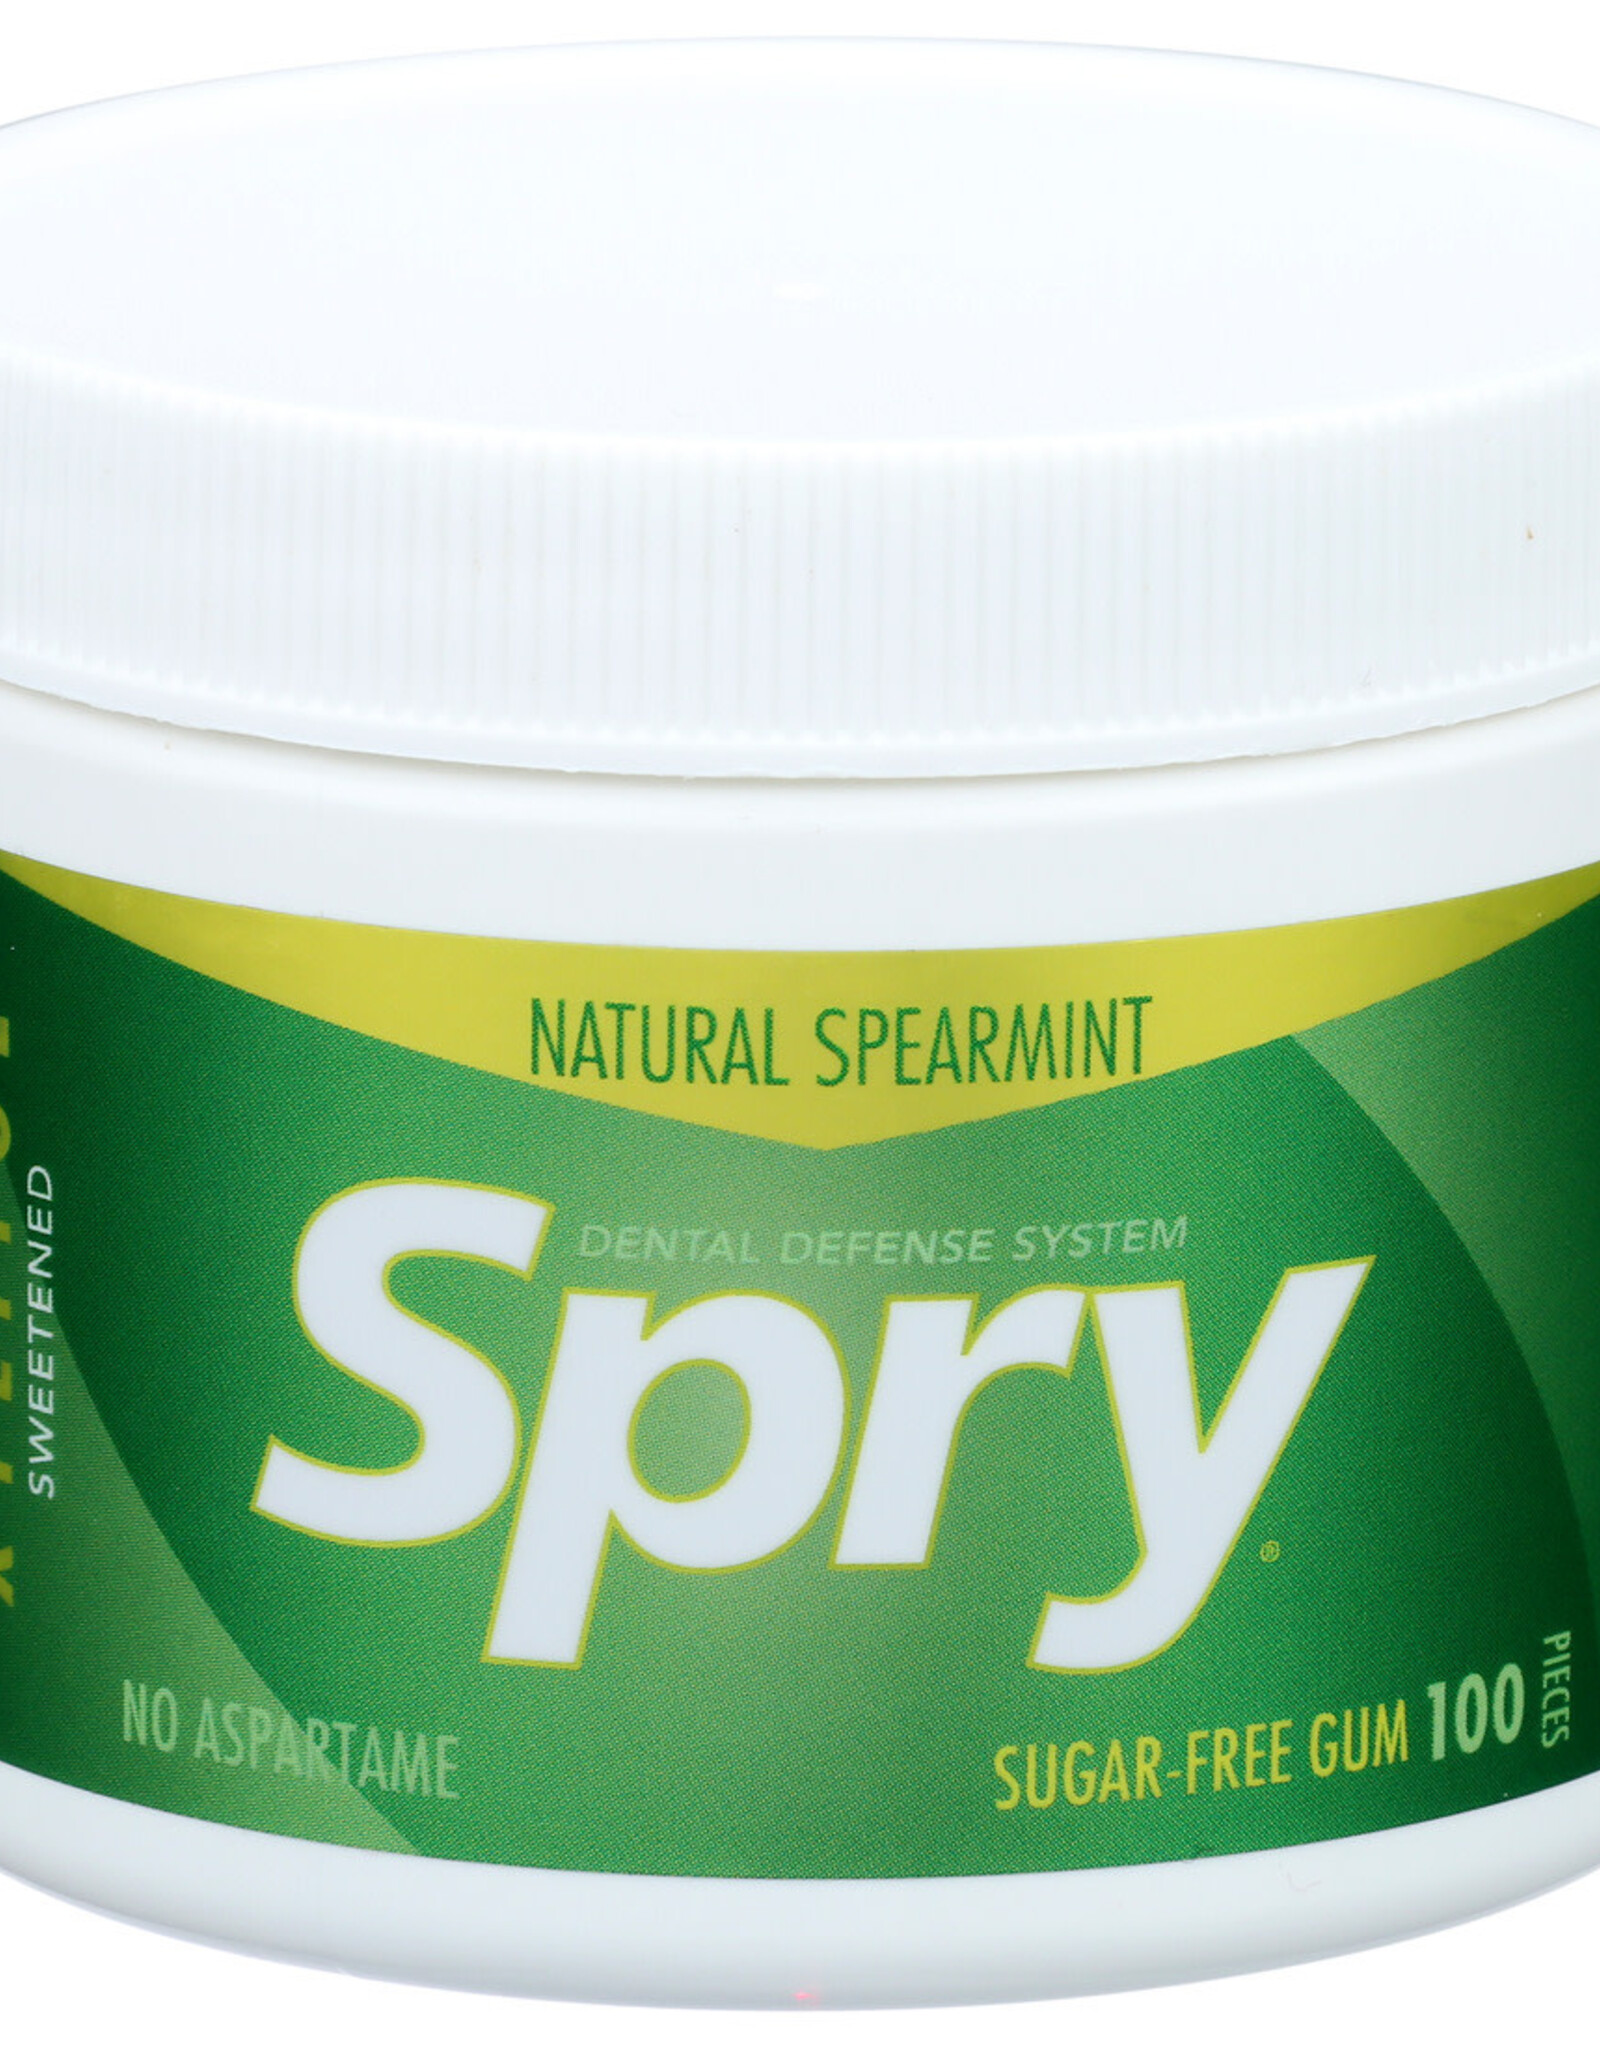 Spry, Chewing Gum 100% Xylitol Spearmint Sugar Free 100 Ct